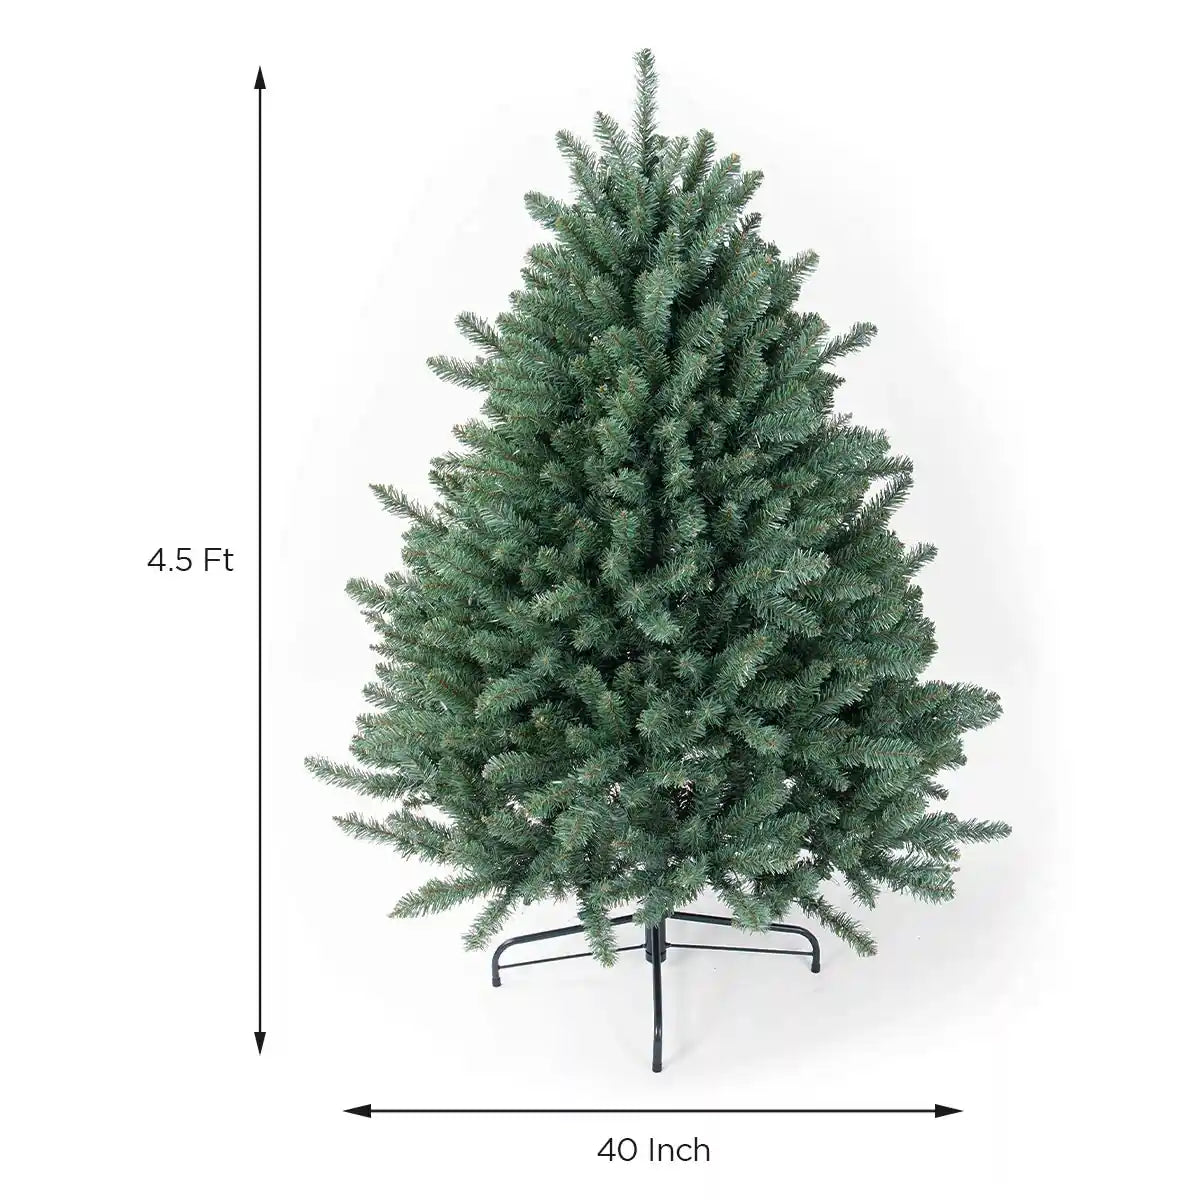 OasisCraft Christmas Tree 4.5FT Size#size_4.5FT